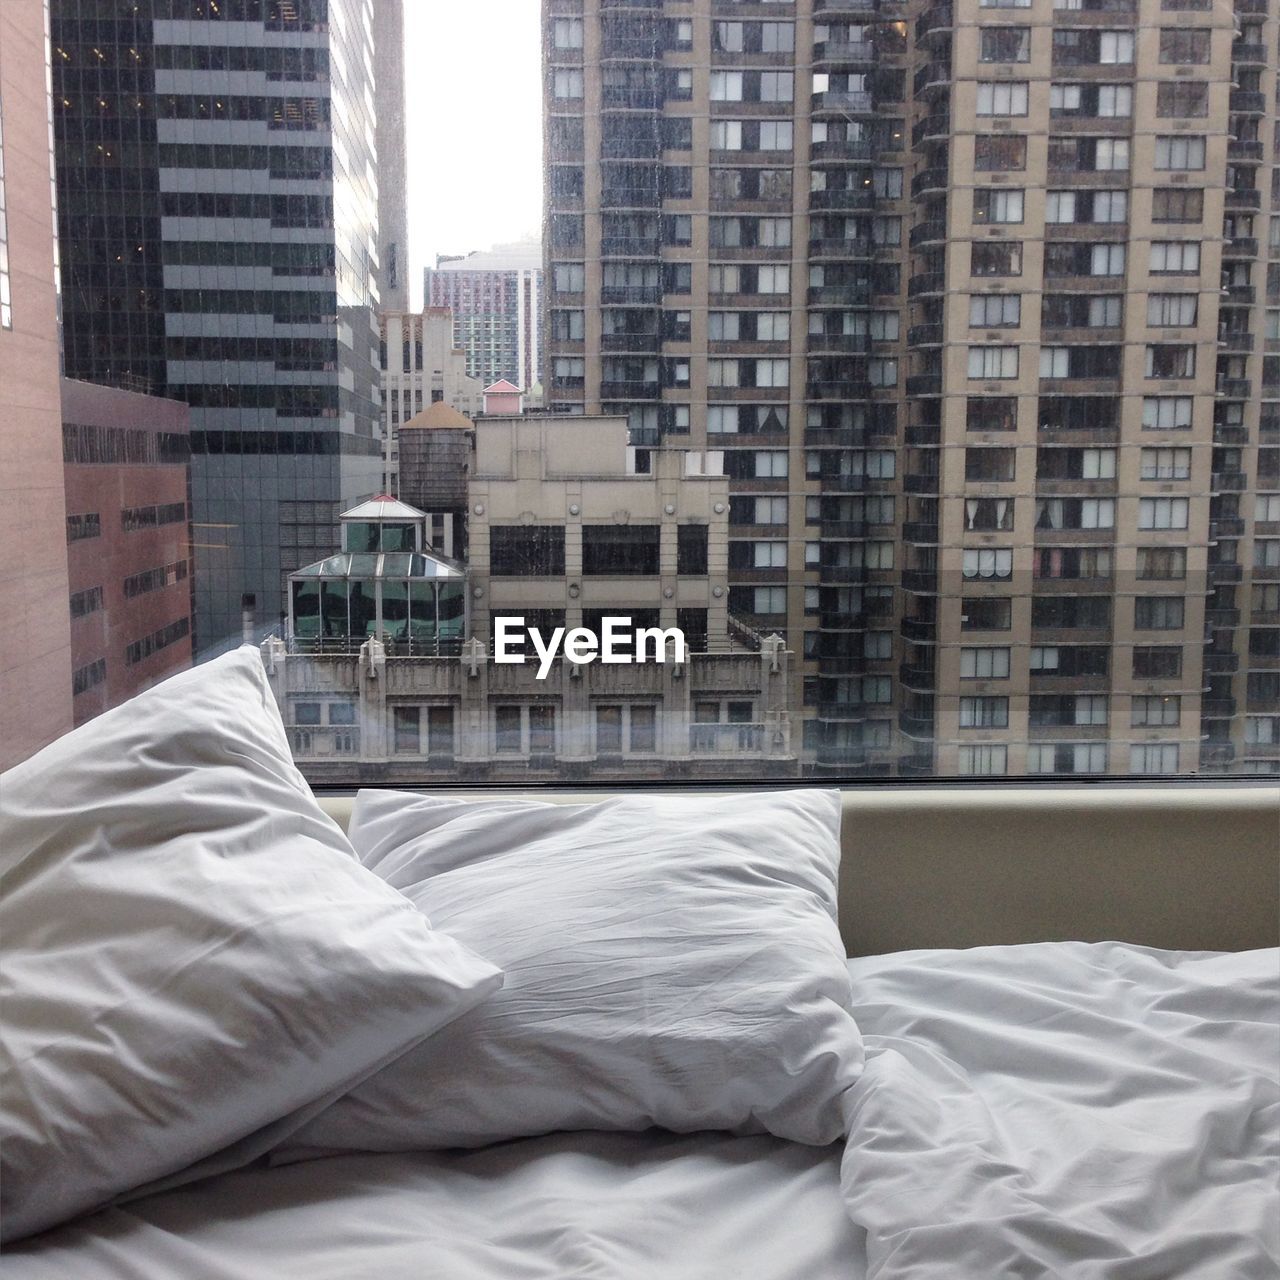 Bed and cushion by window with buildings in background